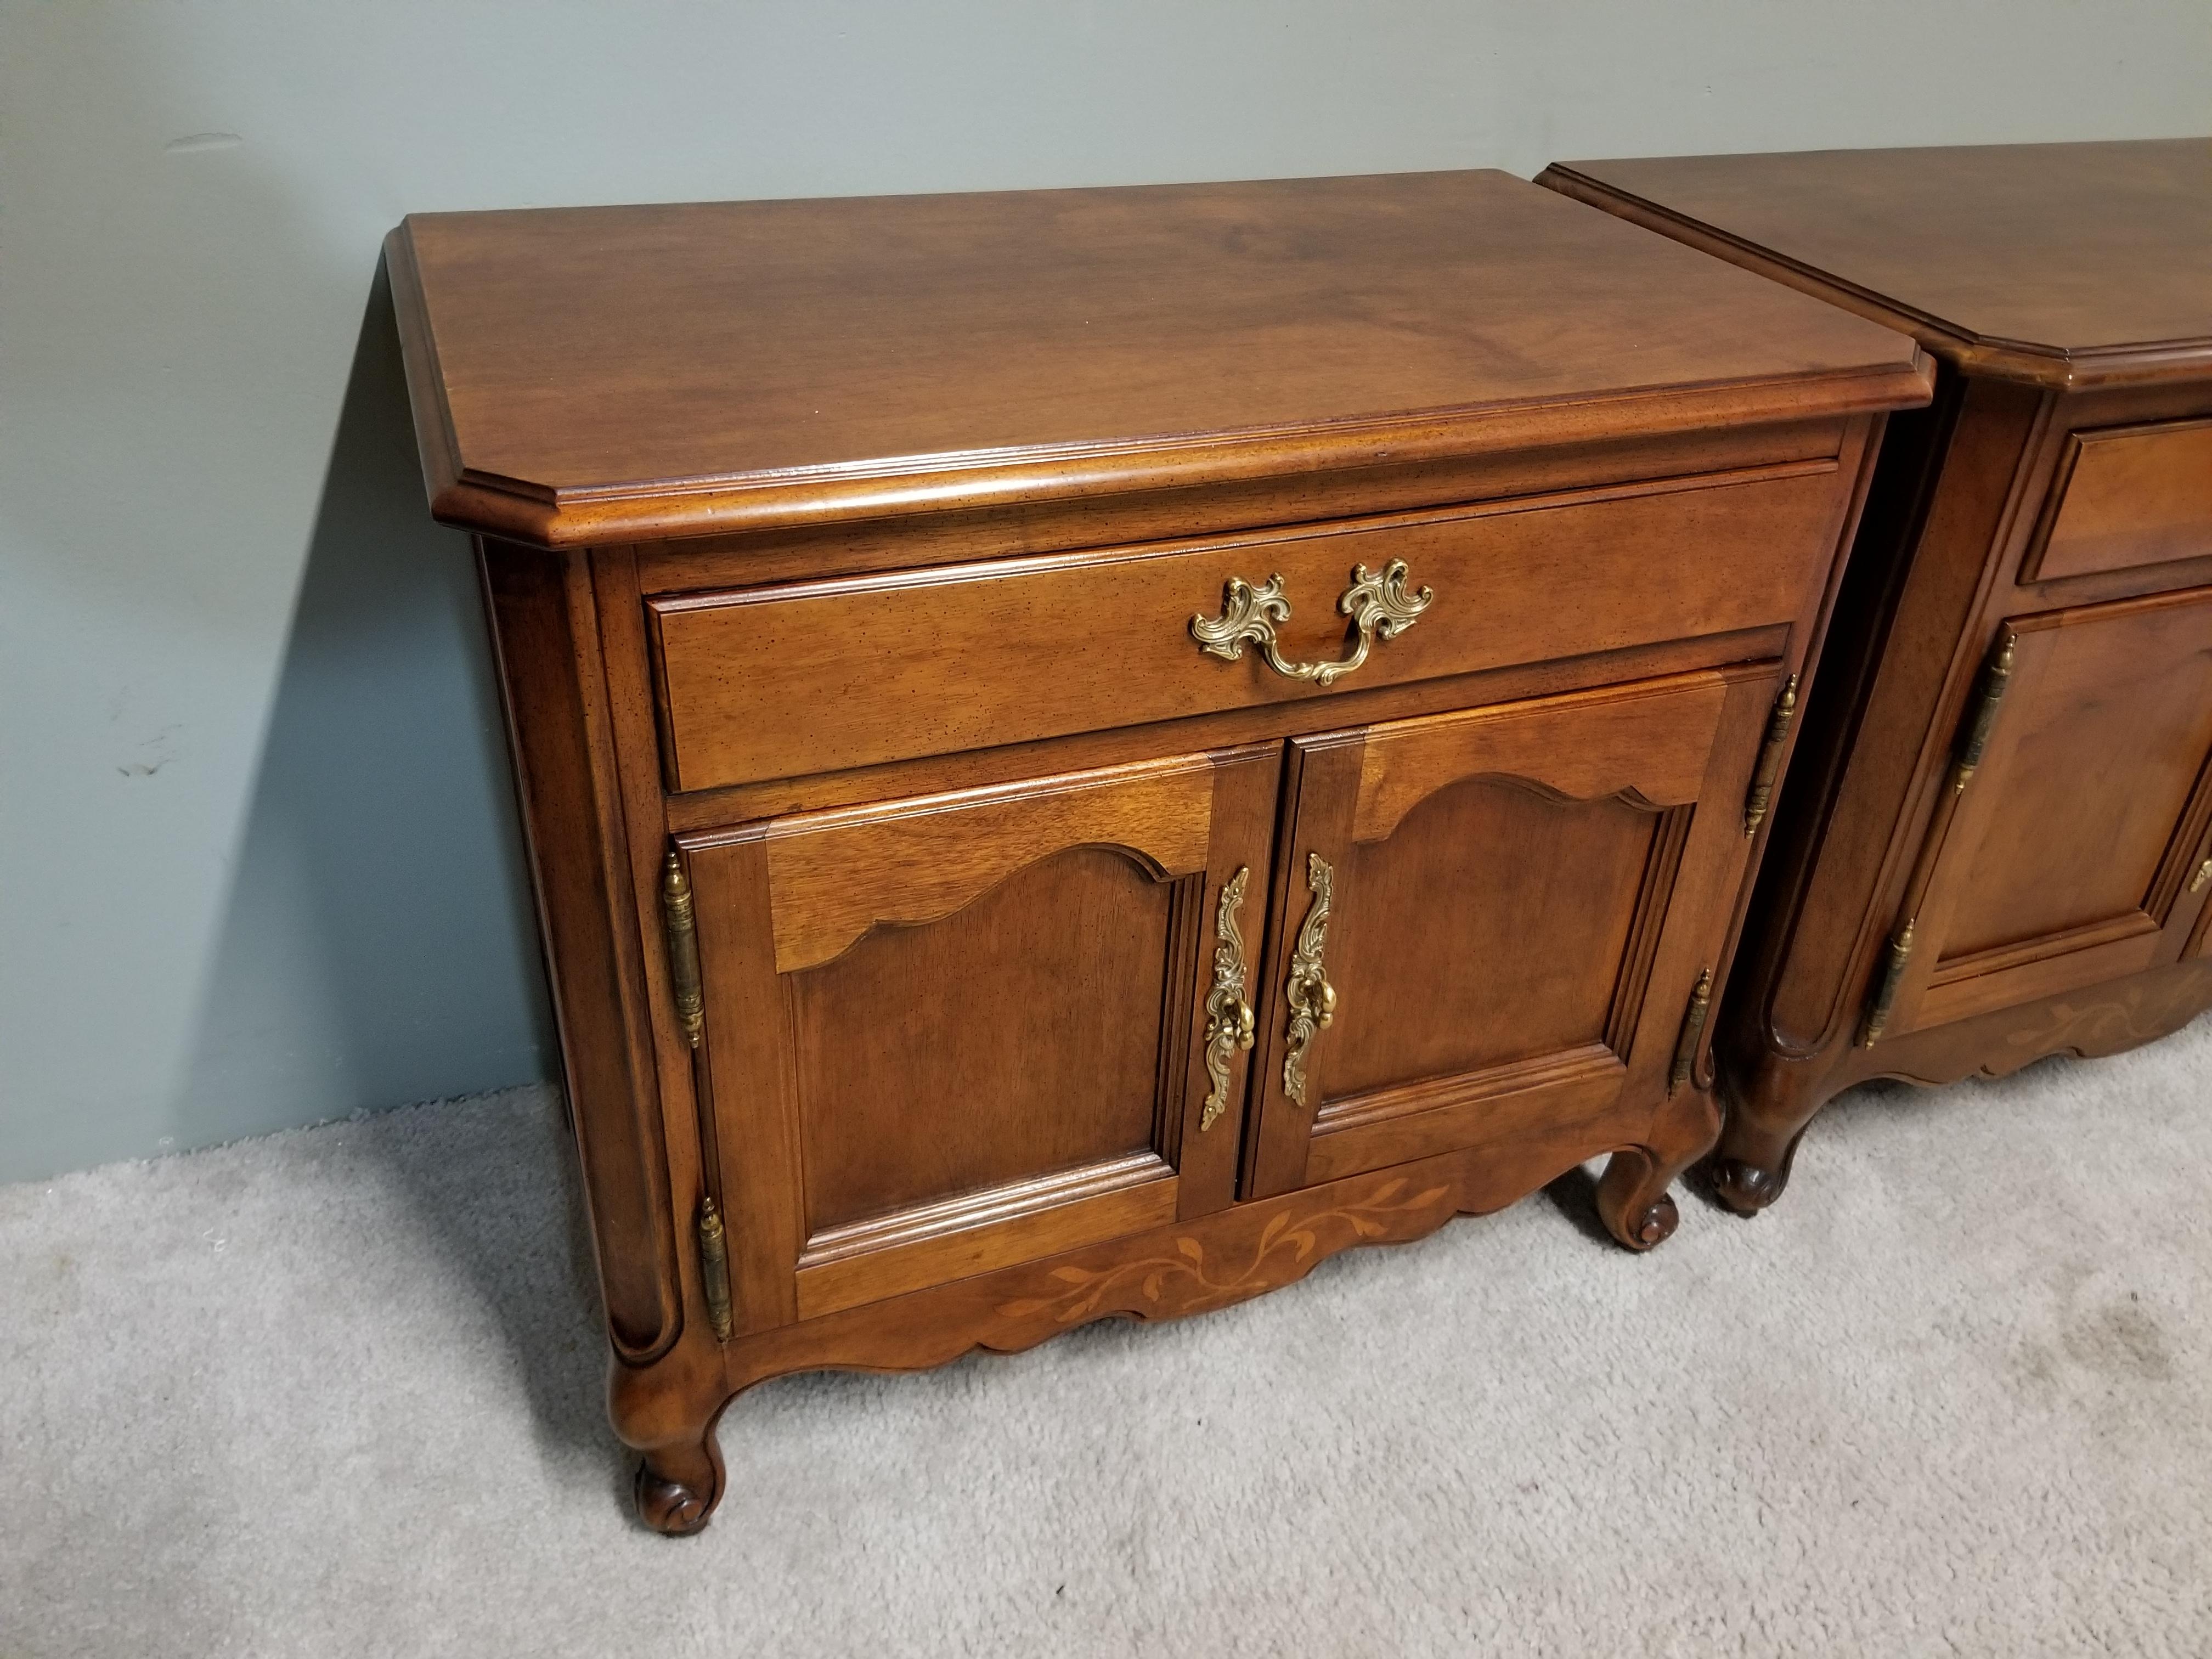 French Provincial Mahogany Nightstands In Good Condition For Sale In Lake Worth, FL